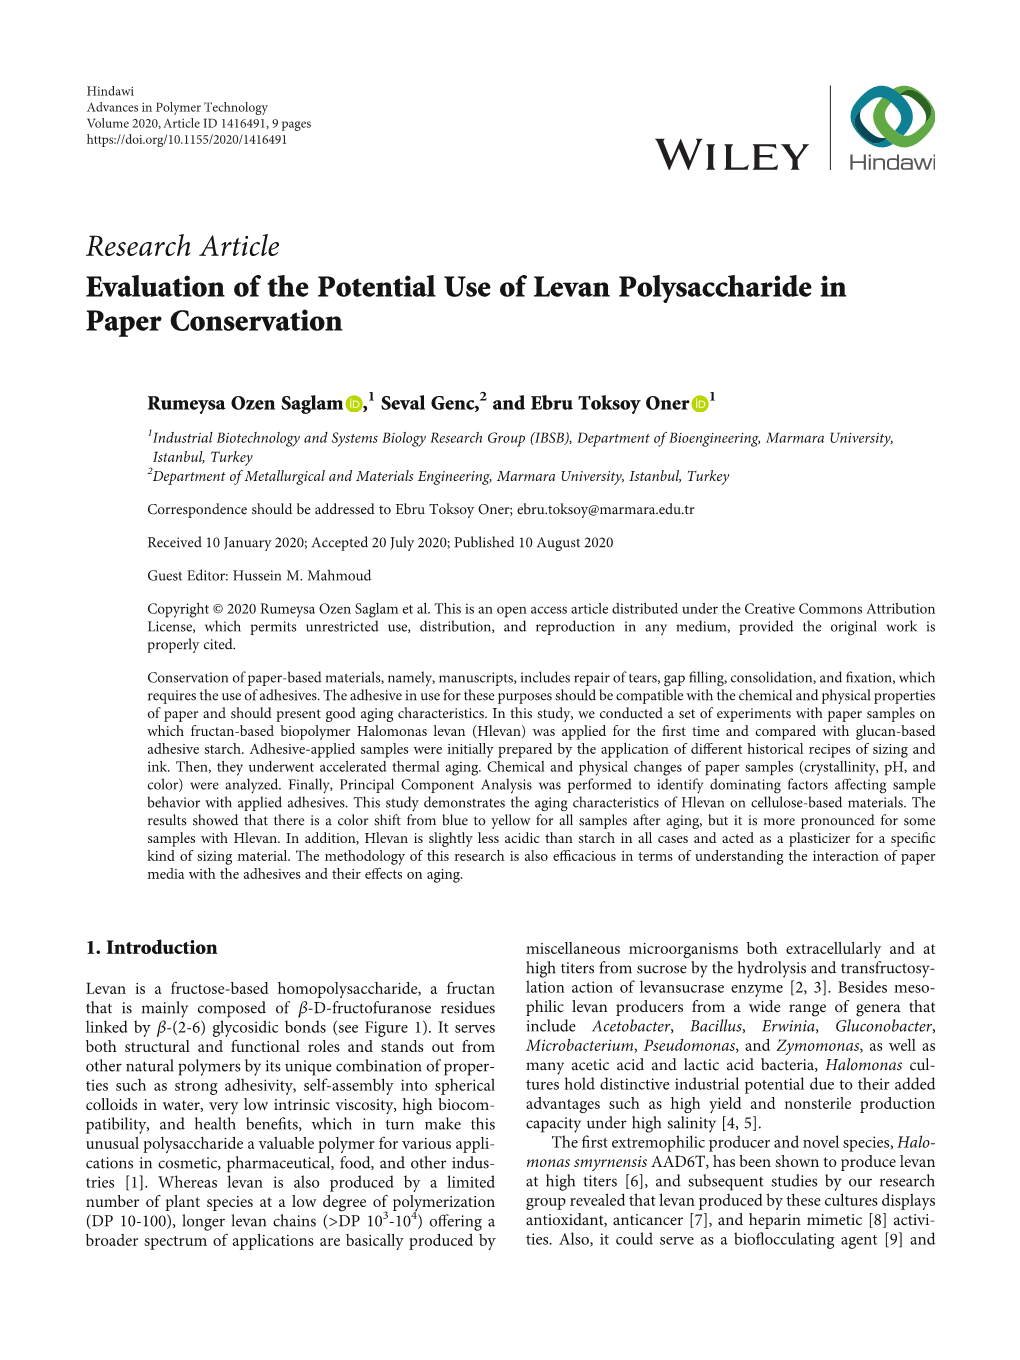 Evaluation of the Potential Use of Levan Polysaccharide in Paper Conservation